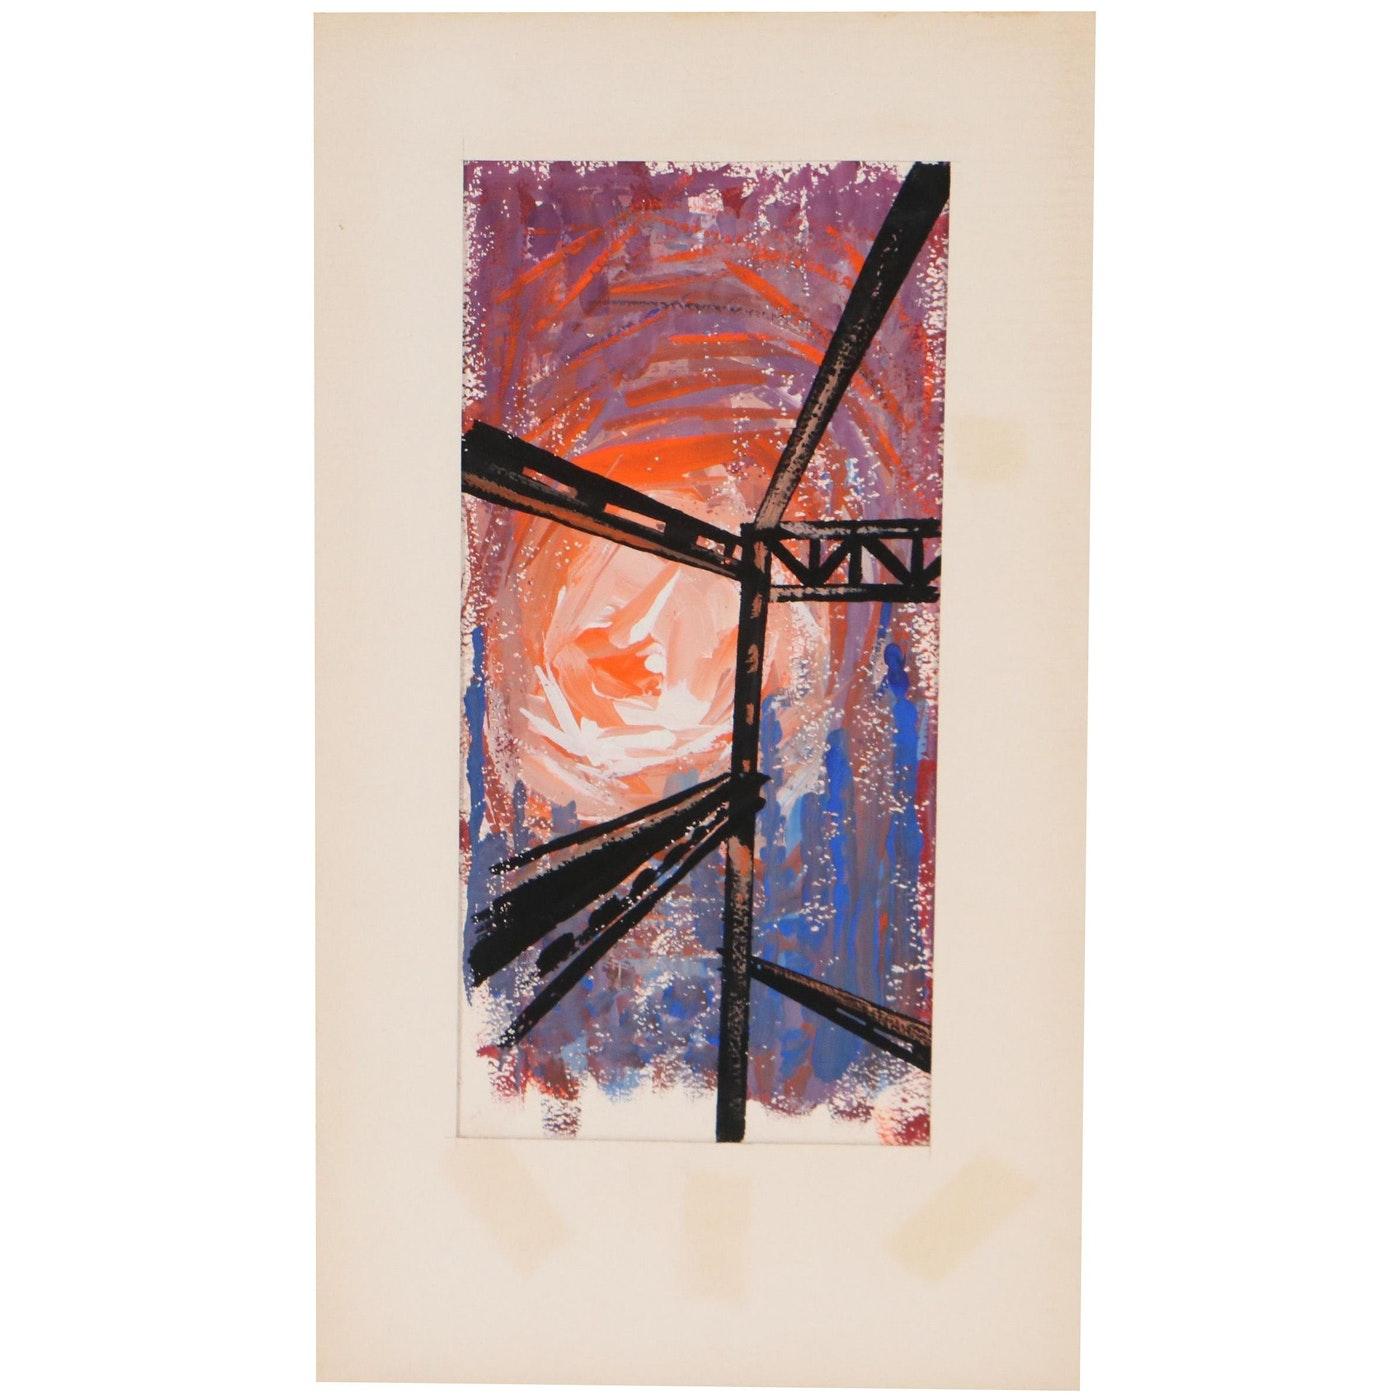 Nick Barberi (20th century)
Construction in Orange
Gouache on paperboard
Signed and inscribed to verso

Measurements:
7 inches wide x 16.50 inches high x 0.1 inches thick (sheet)

Nicholas Barbieri (American, 1942 - 2013)
“One might say Art was who